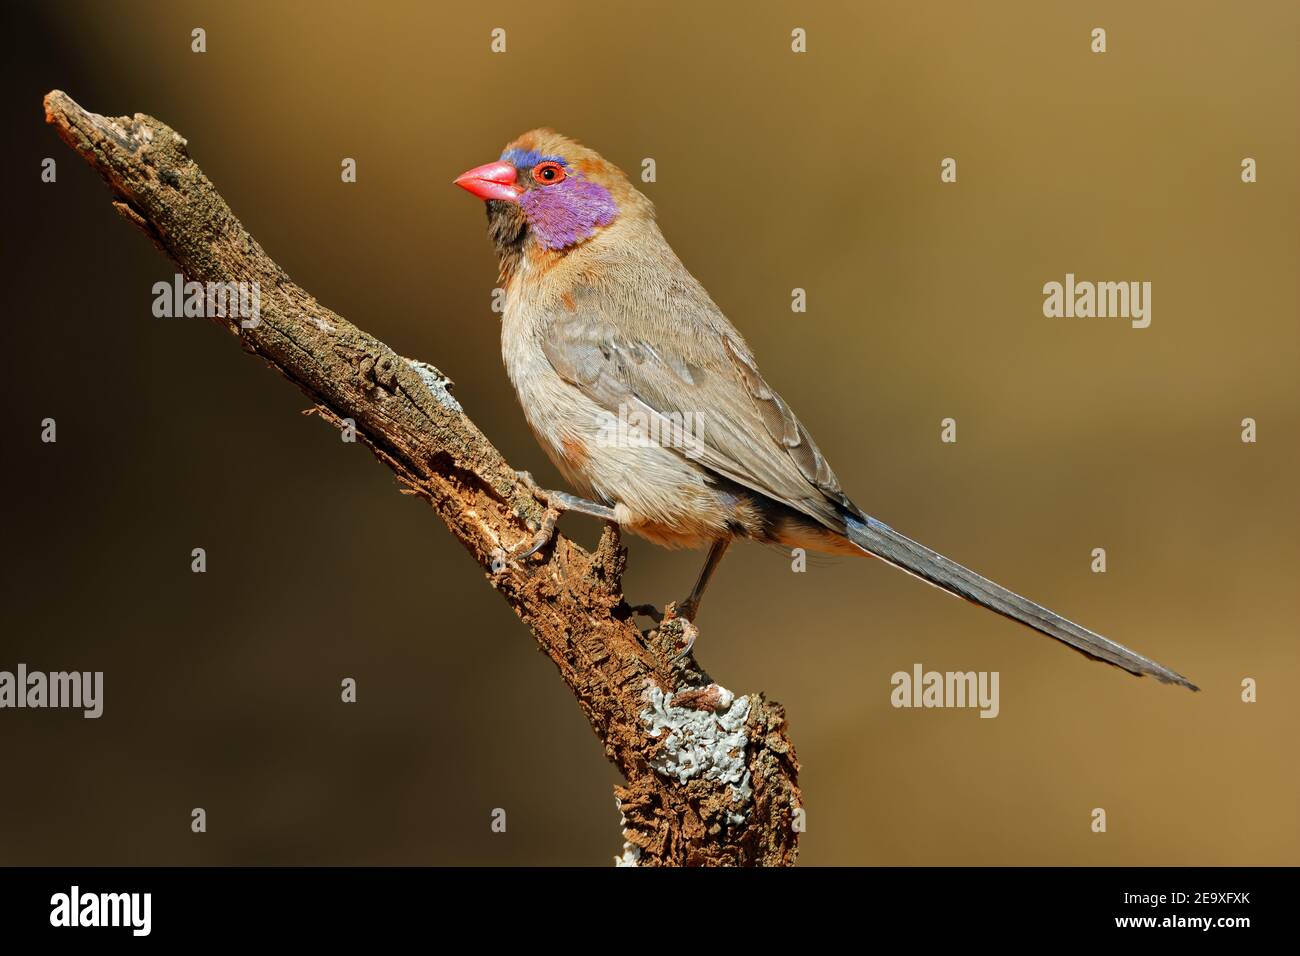 A female violet-eared waxbill (Uraeginthus granatinus) perched on a branch, South Africa Stock Photo